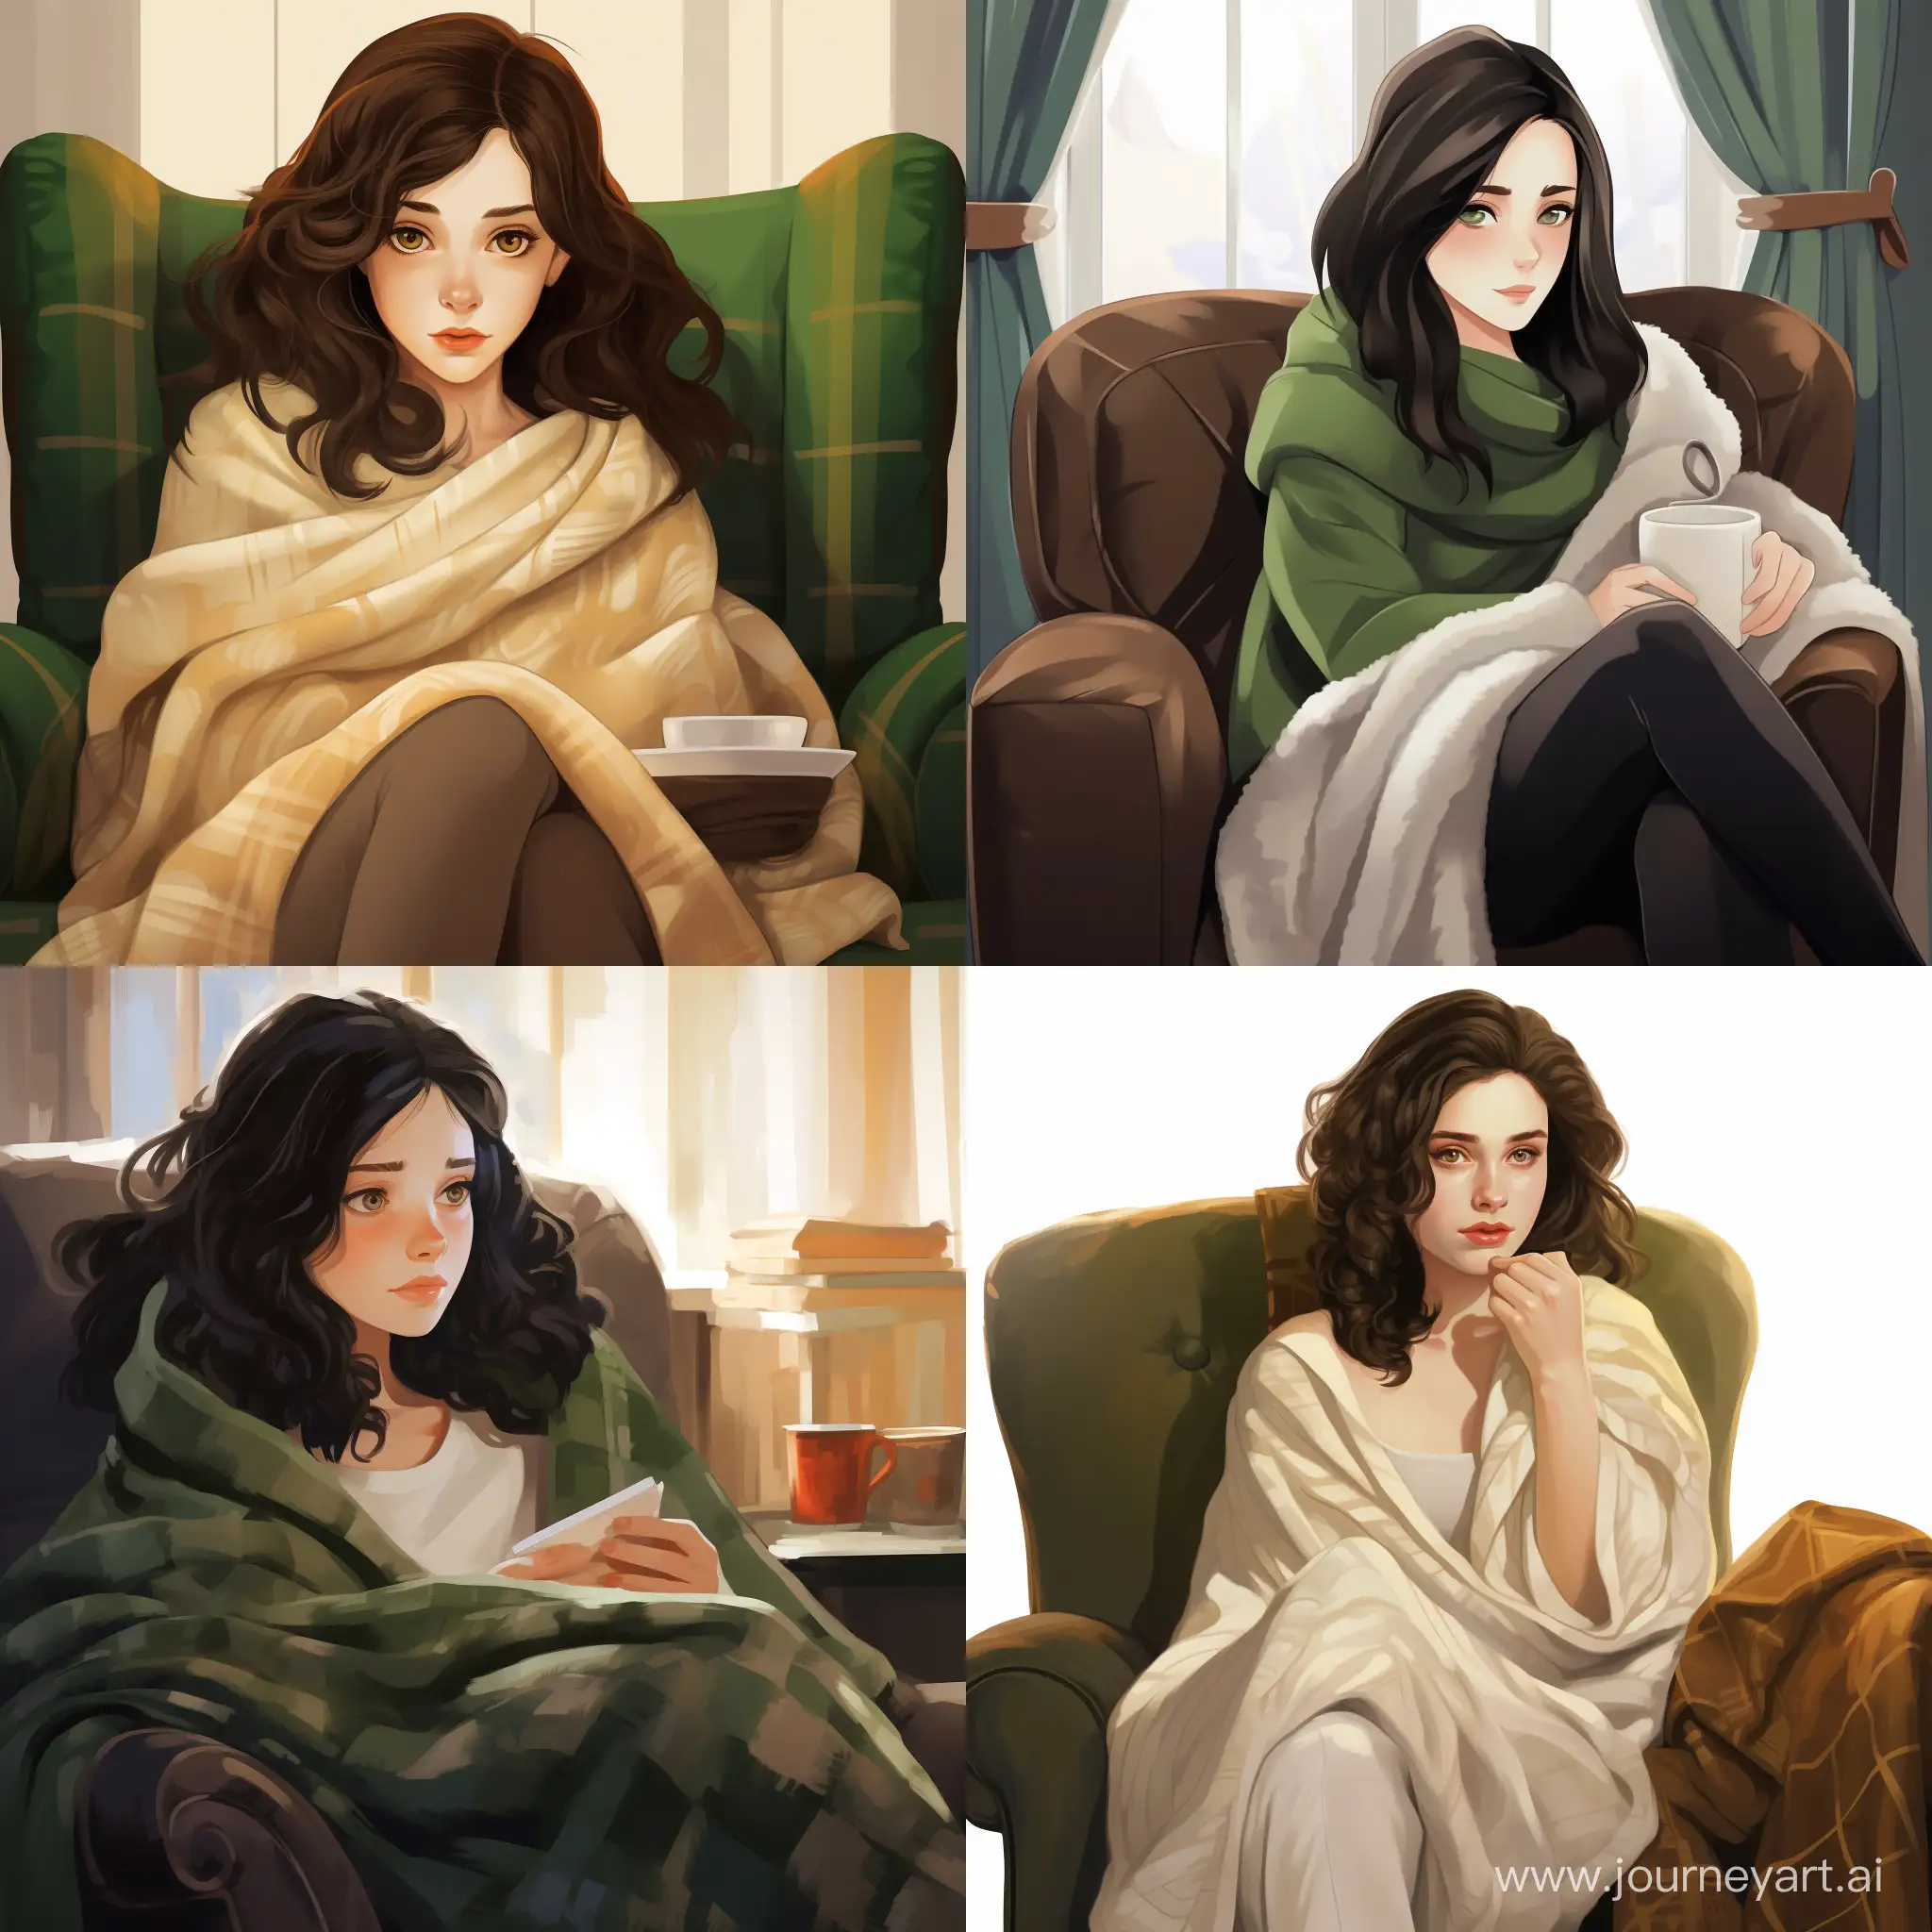 Contemplative-Teen-Girl-Wrapped-in-Blanket-HighQuality-Cartoon-Art